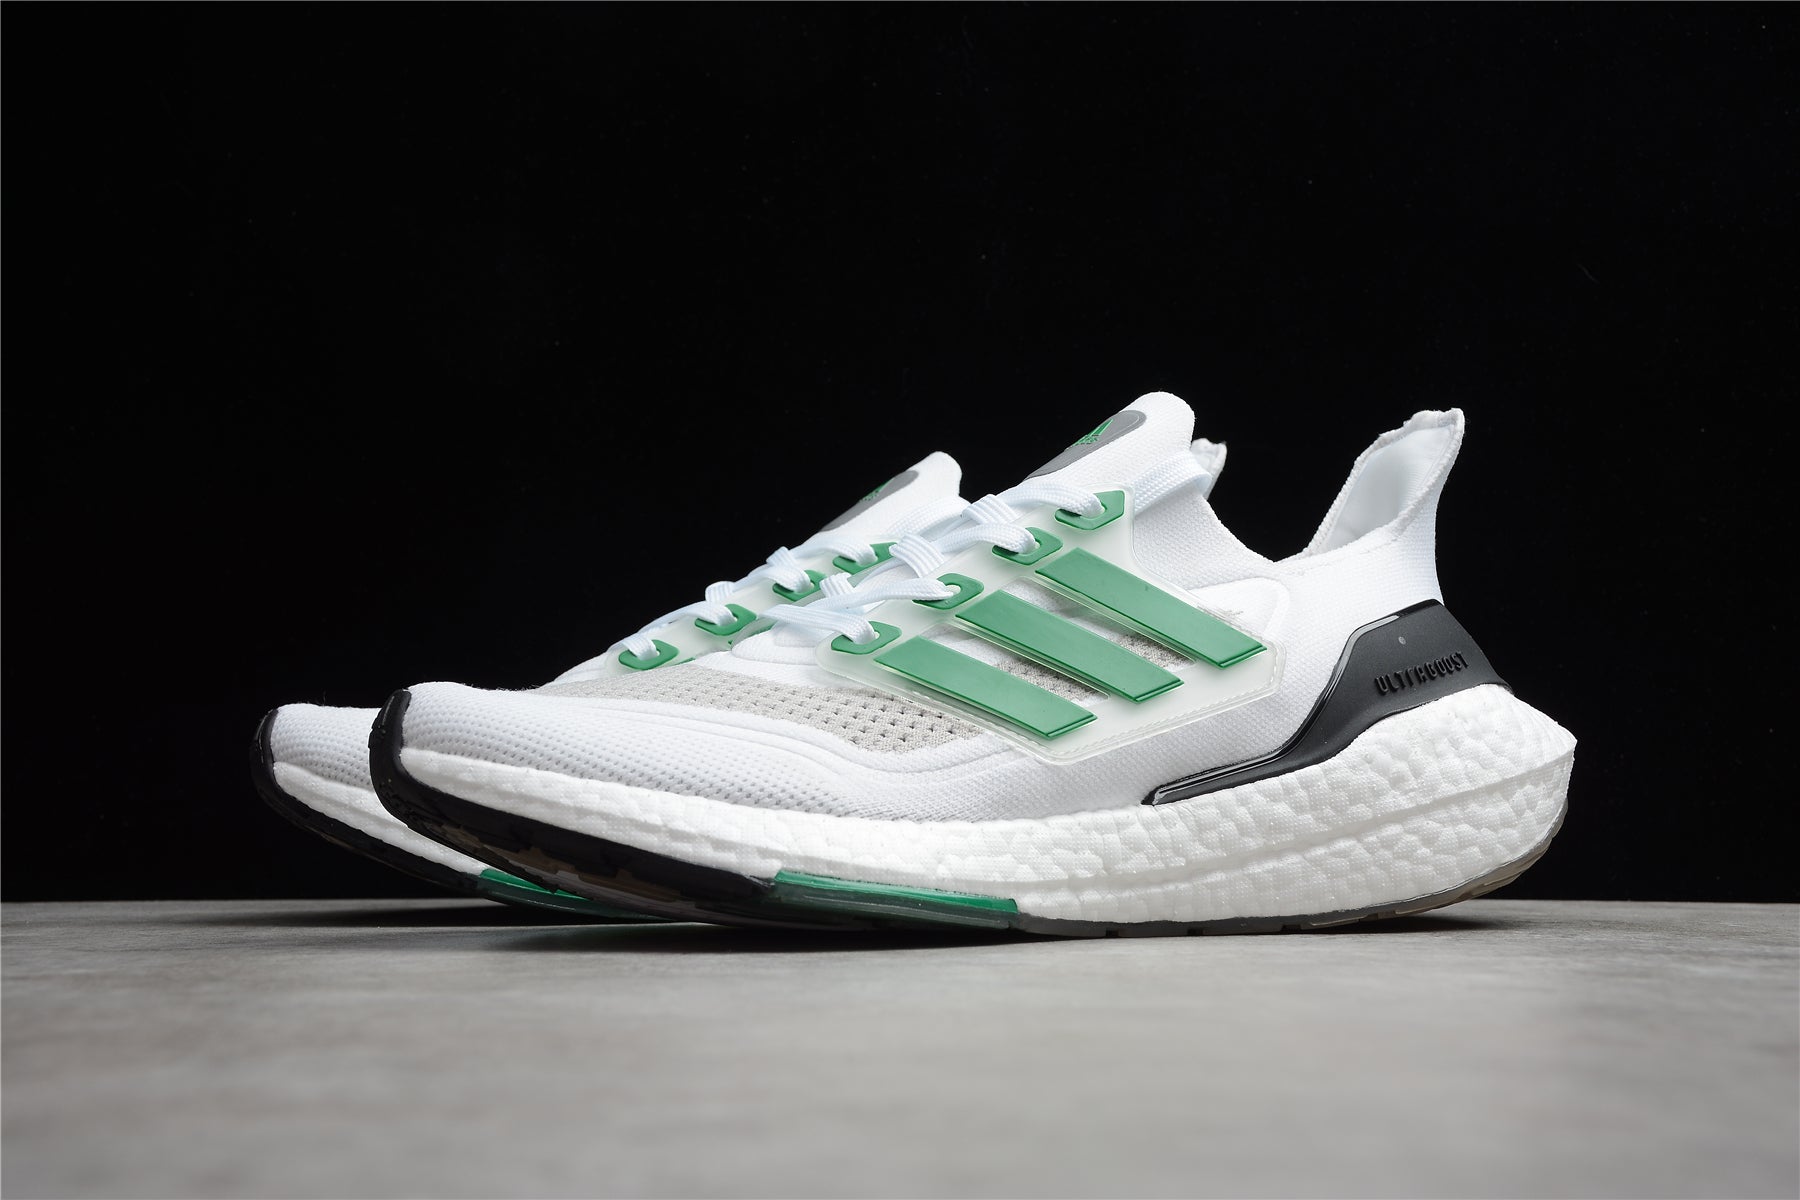 Adidas ultraboost white green shoes